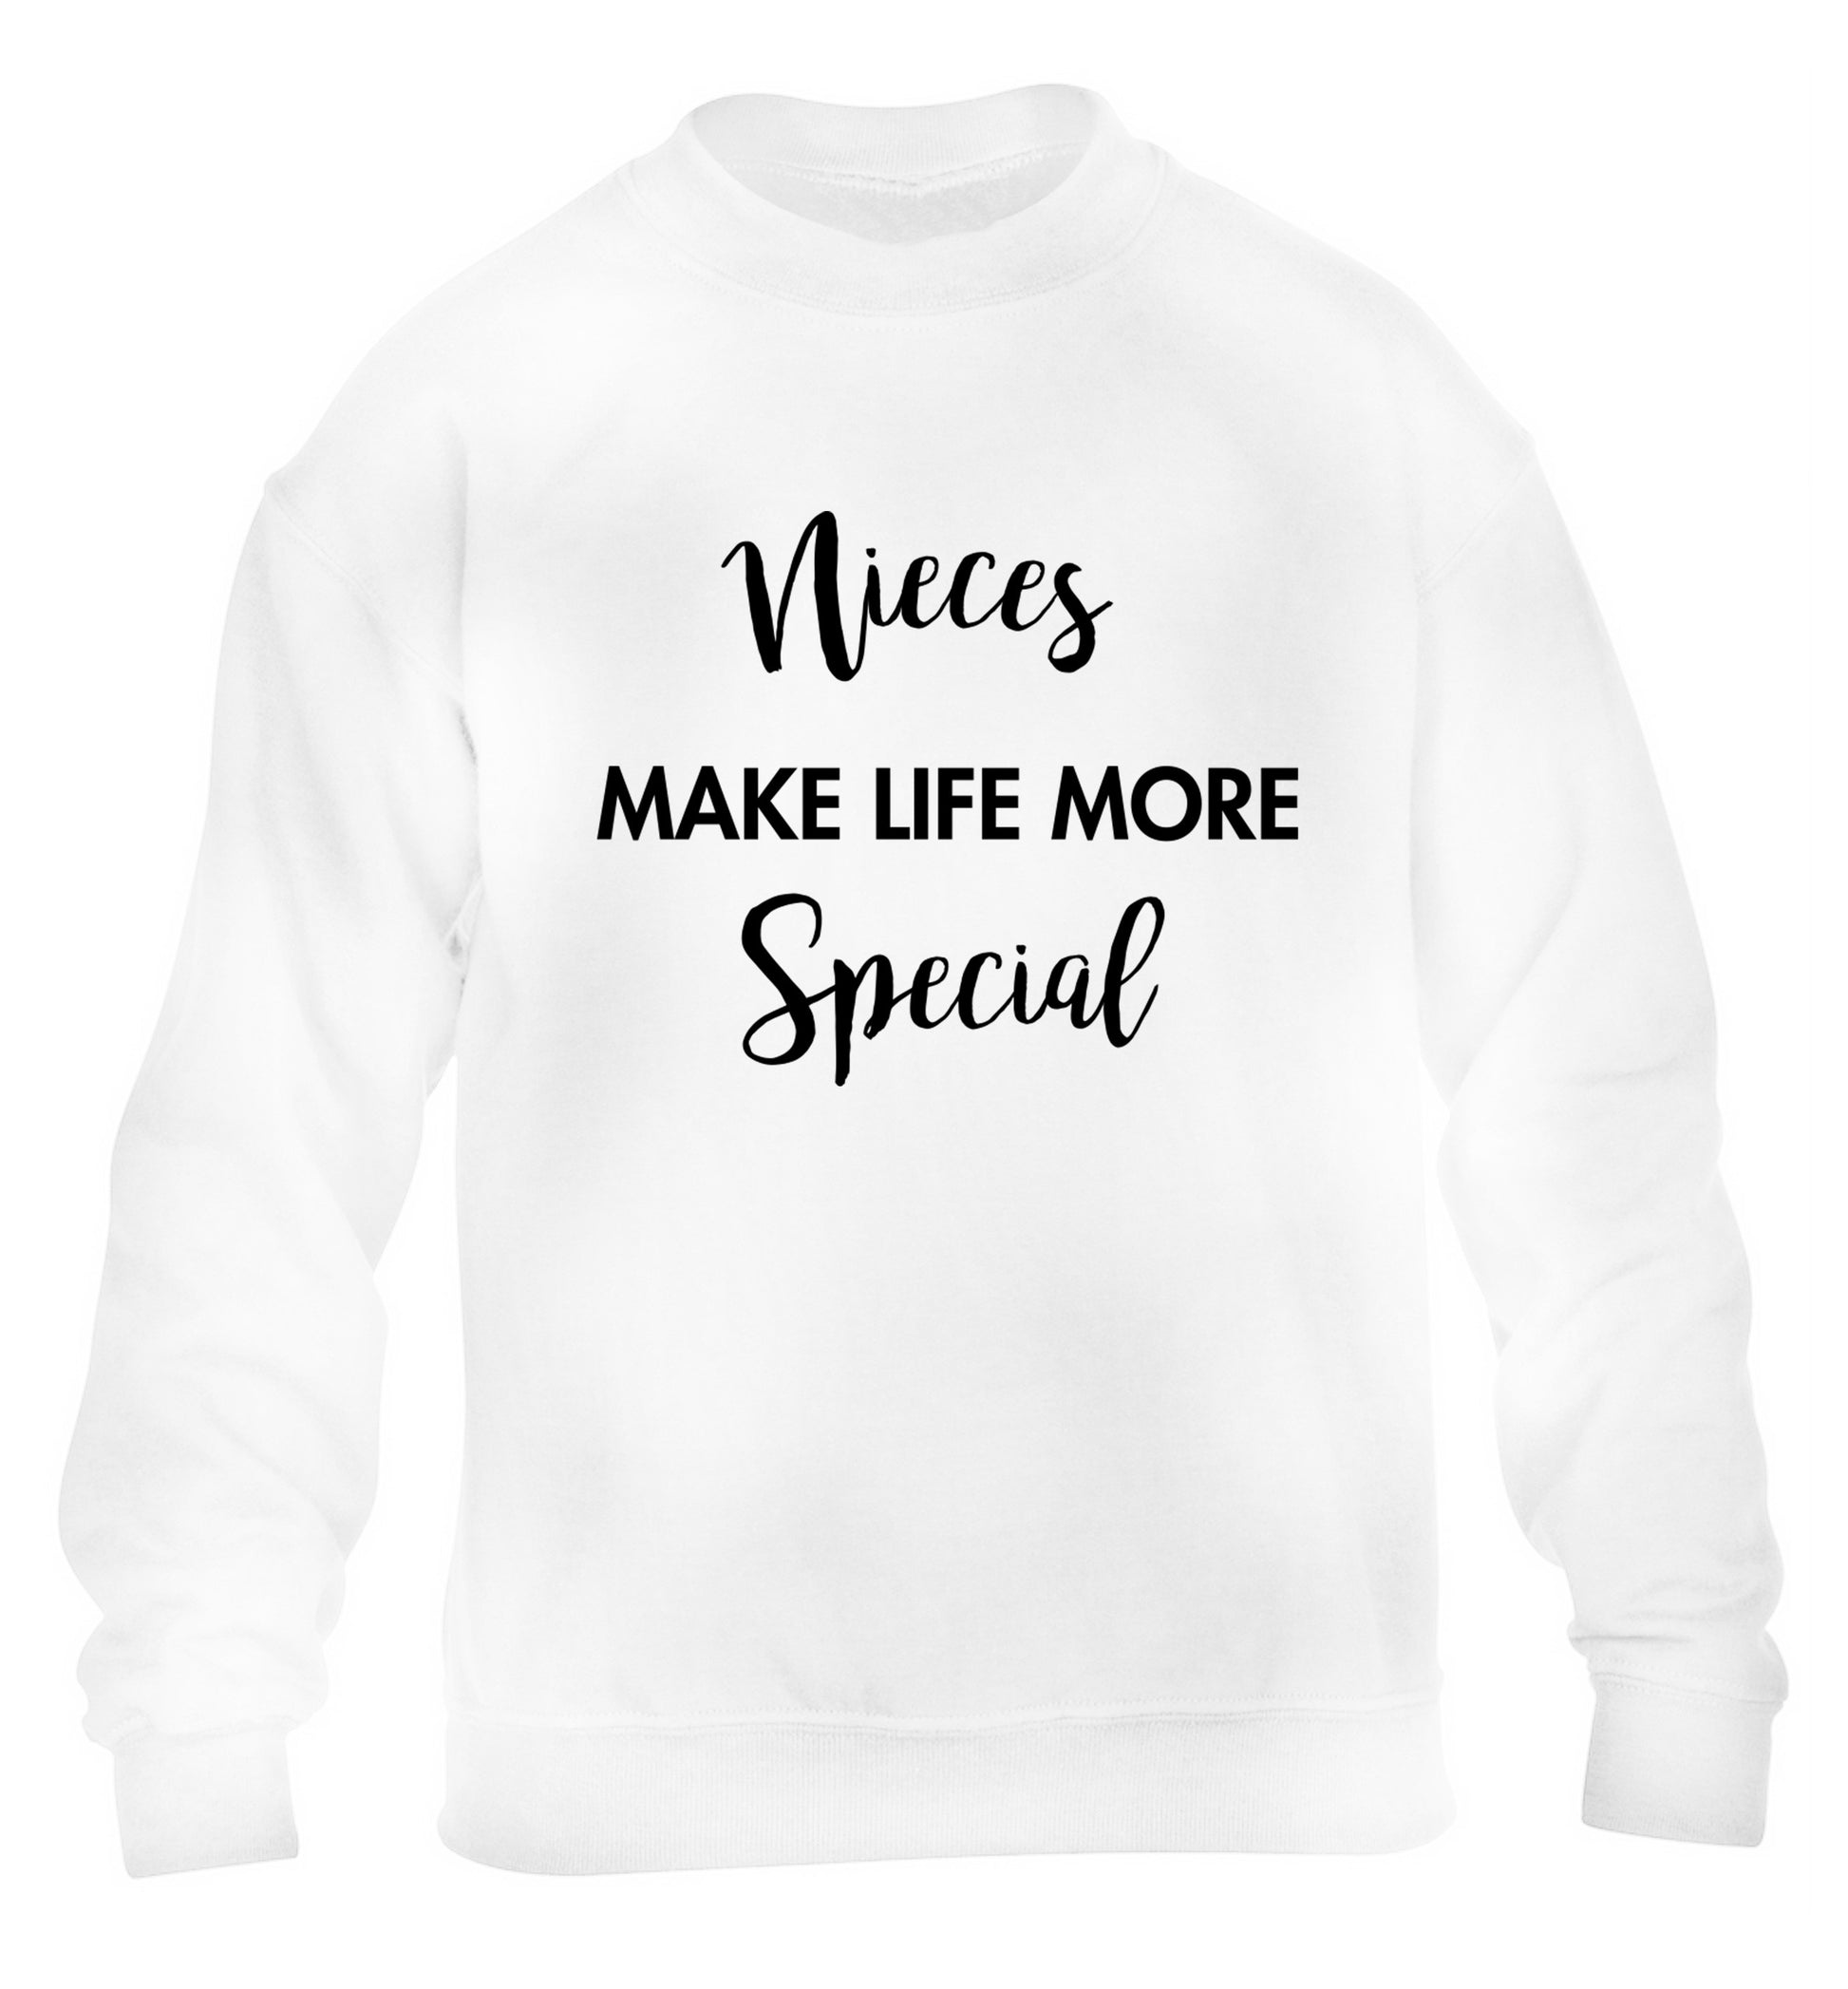 Nieces make life more special children's white sweater 12-14 Years